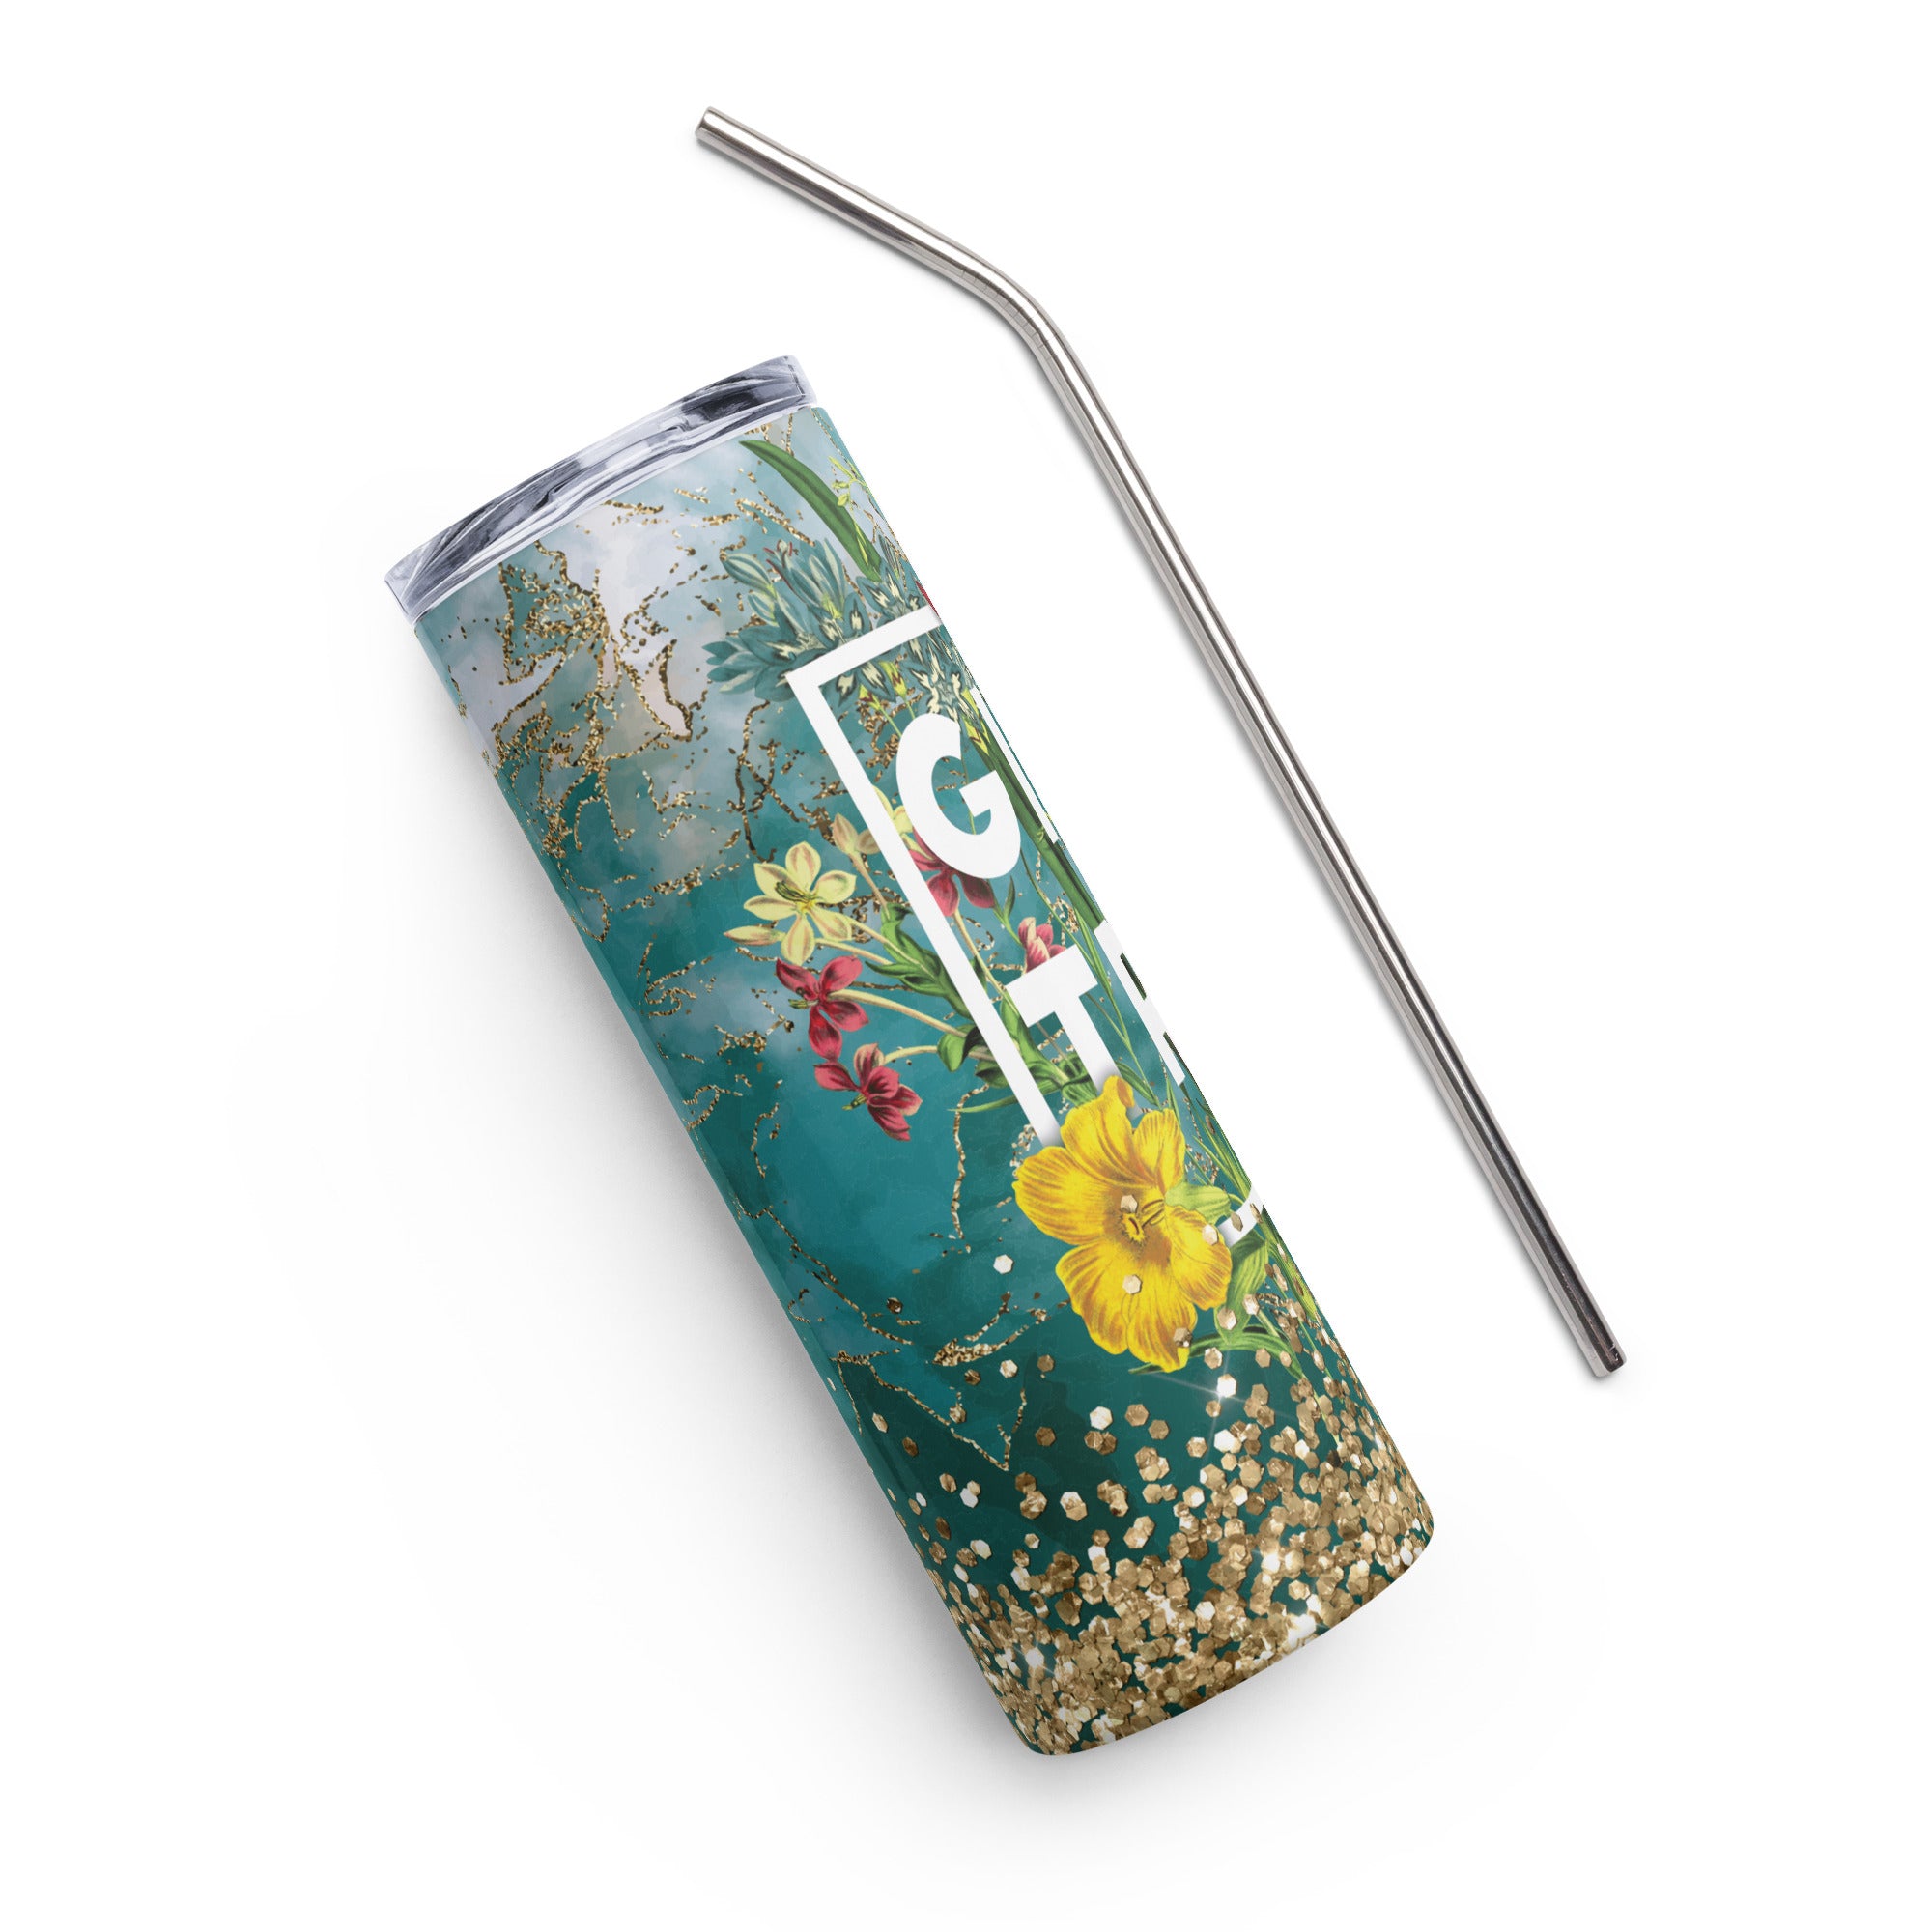 Floral Girl Trip - Stainless Steel Tumbler